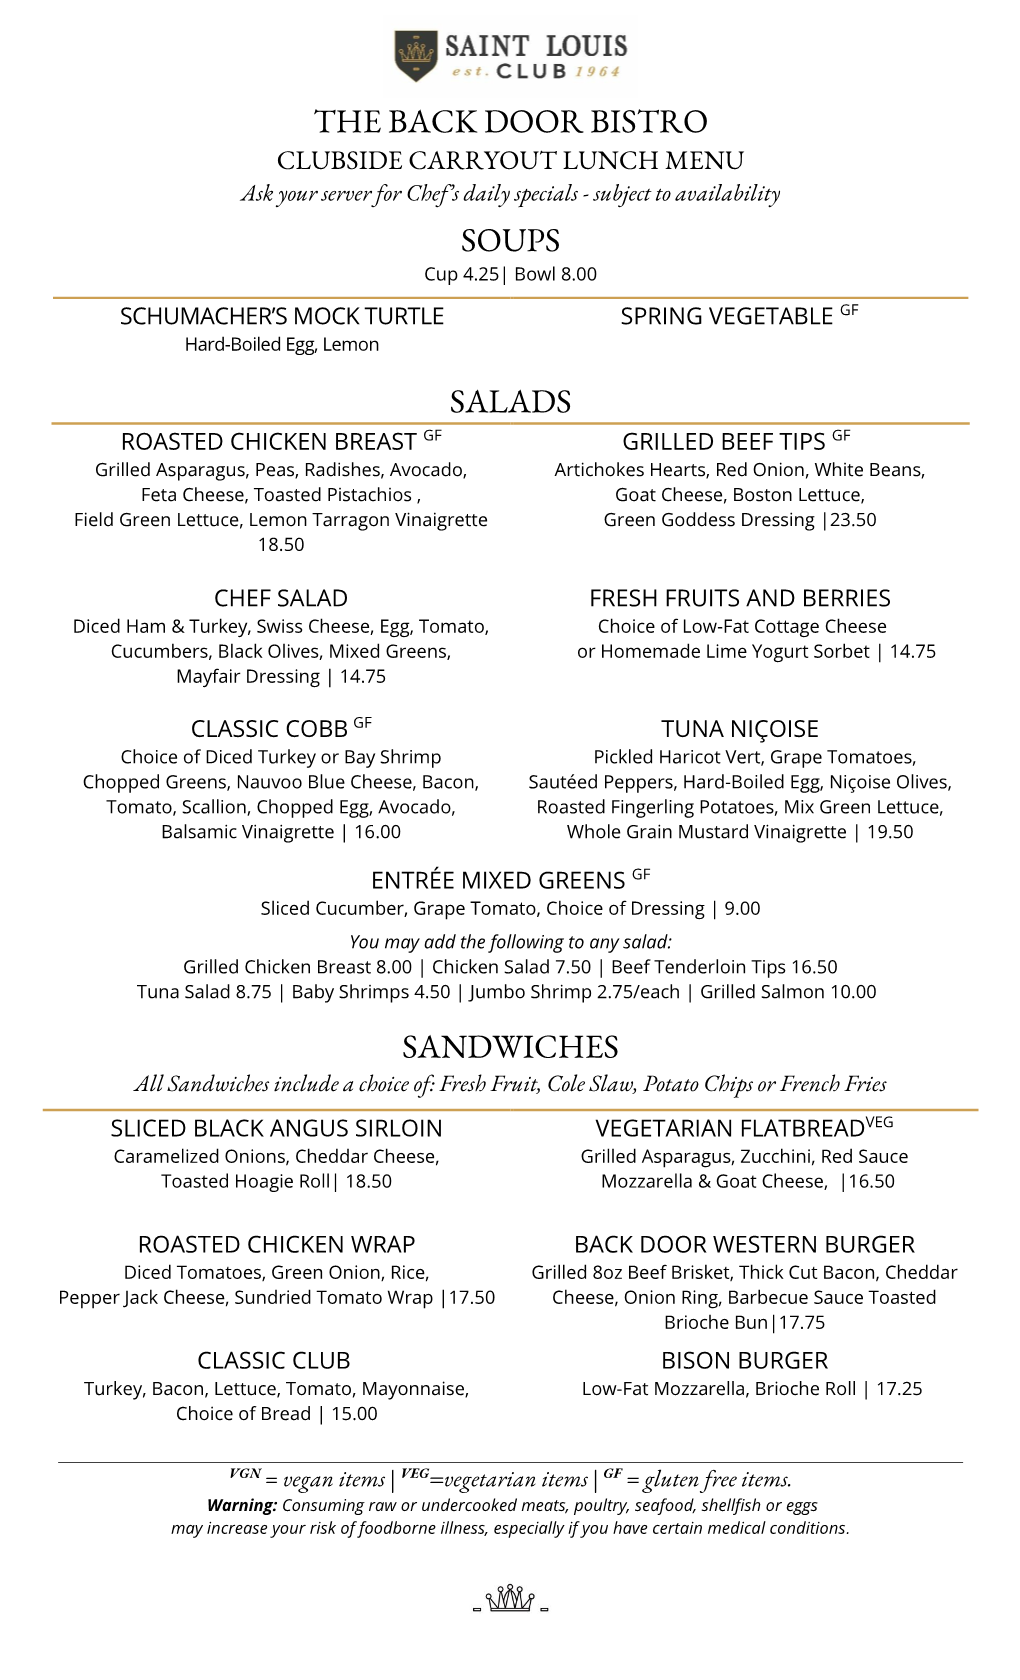 THE BACK DOOR BISTRO CLUBSIDE CARRYOUT LUNCH MENU Ask Your Server for Chef’S Daily Specials - Subject to Availability SOUPS Cup 4.25| Bowl 8.00